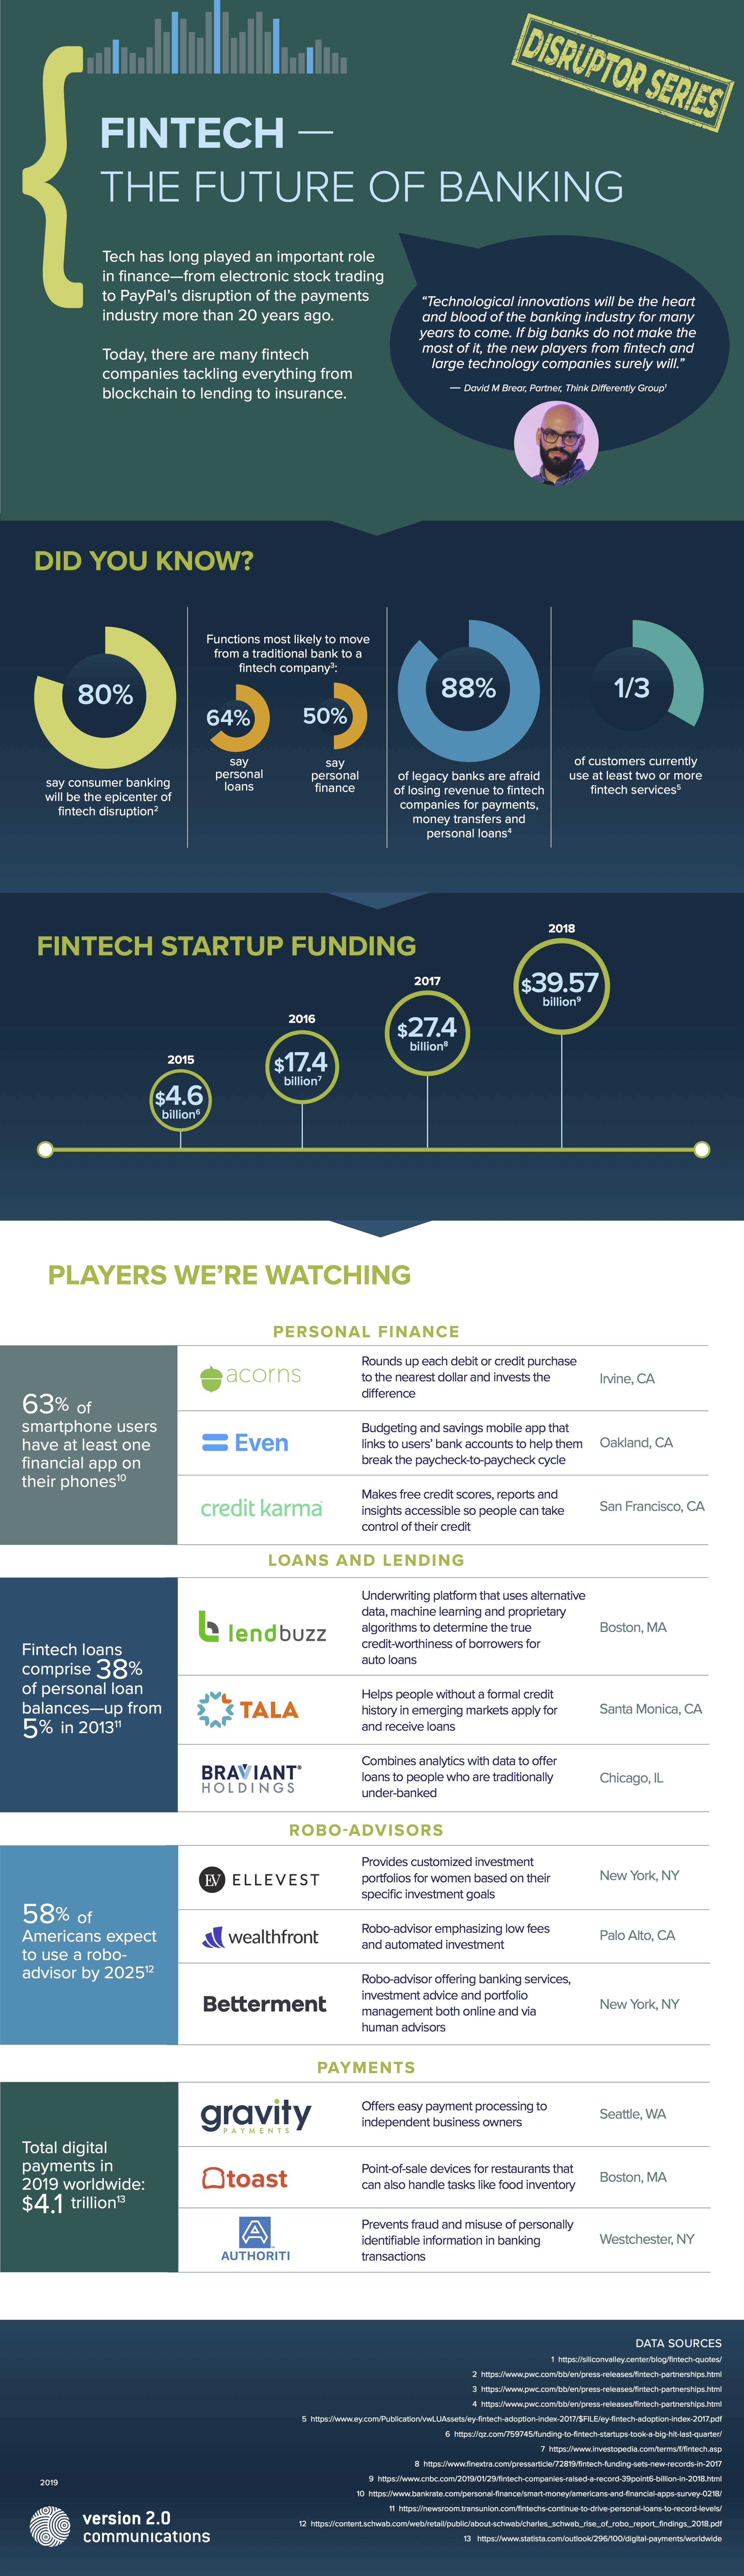 The Fintech Revolution—opportunities and challenges in 2020 